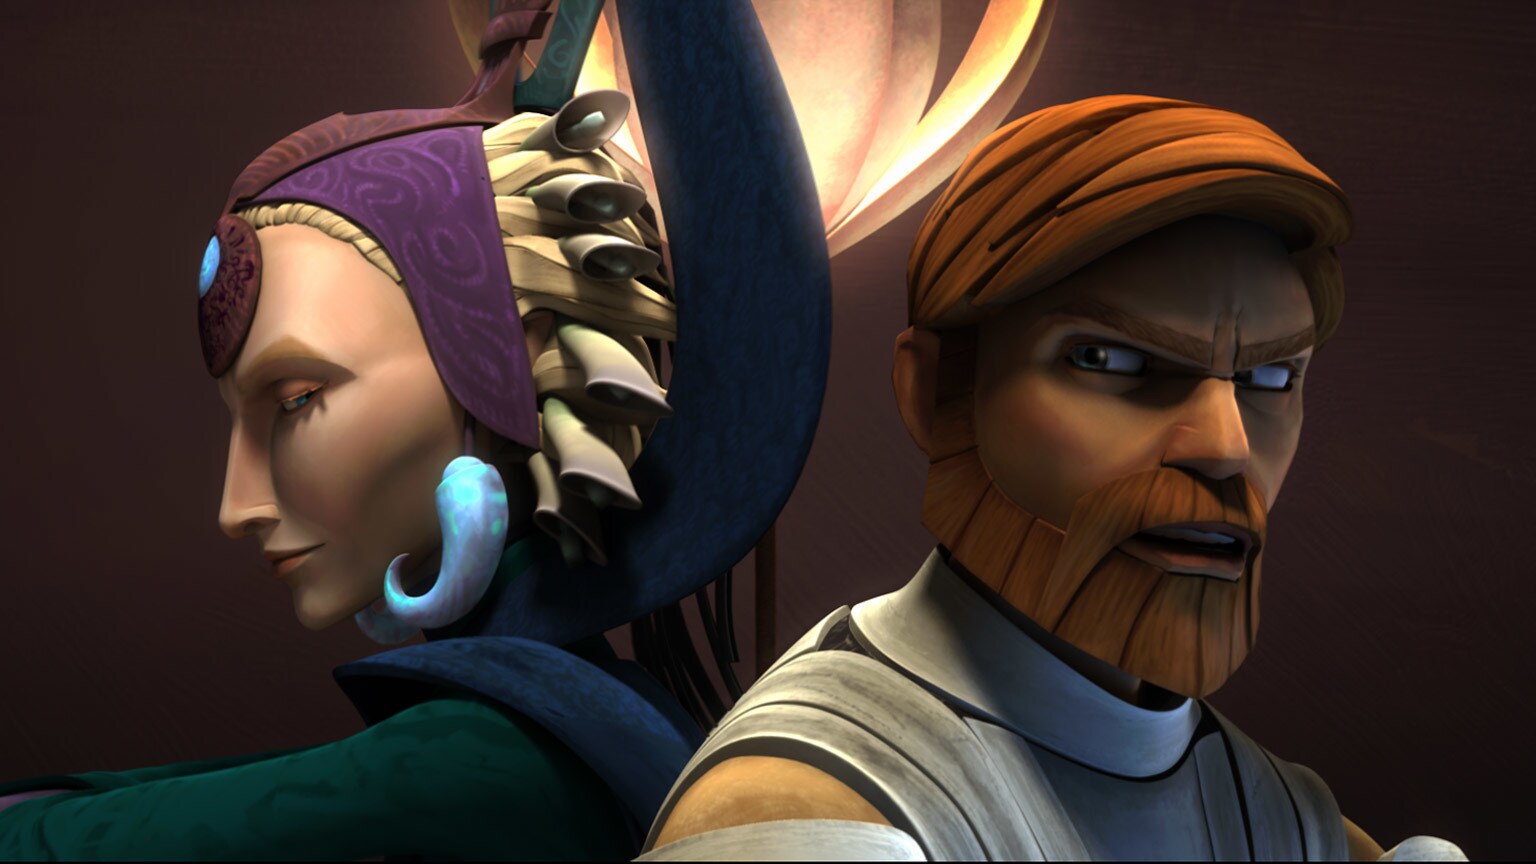 The Clone Wars Rewatch: A Hidden Traitor on the "Voyage of Temptation"